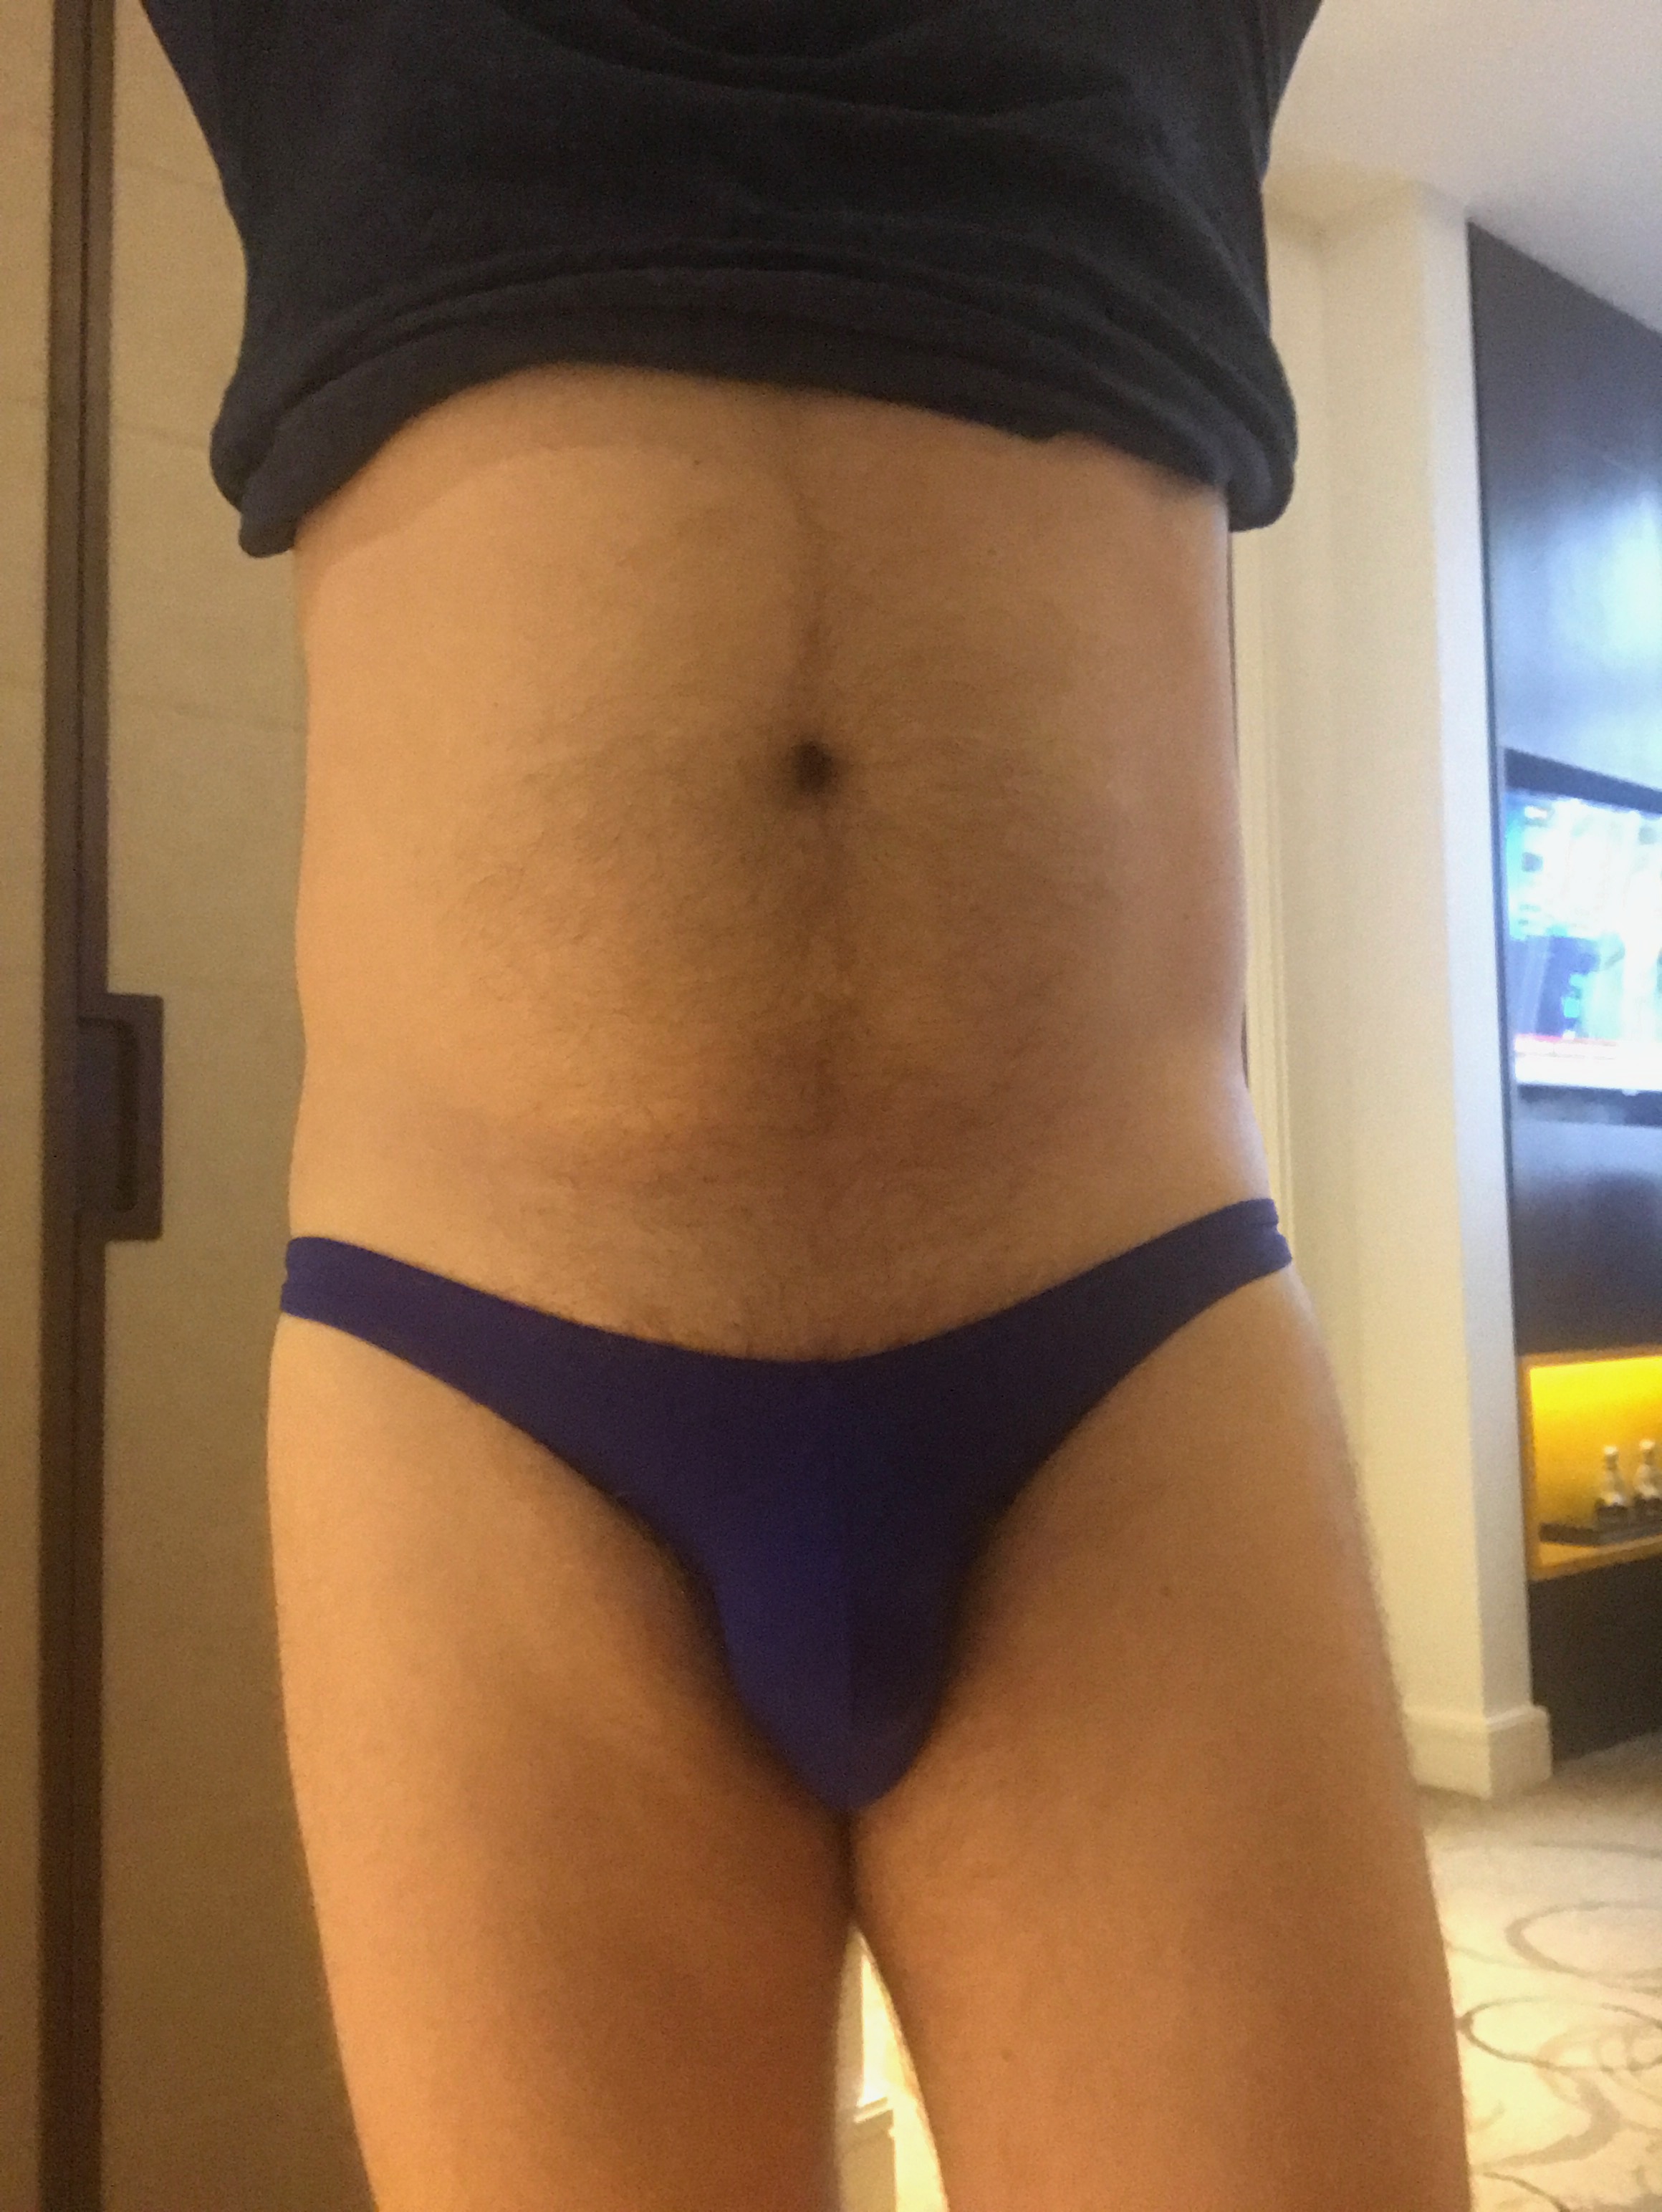 Super low rise bikinis from Male Basics today…